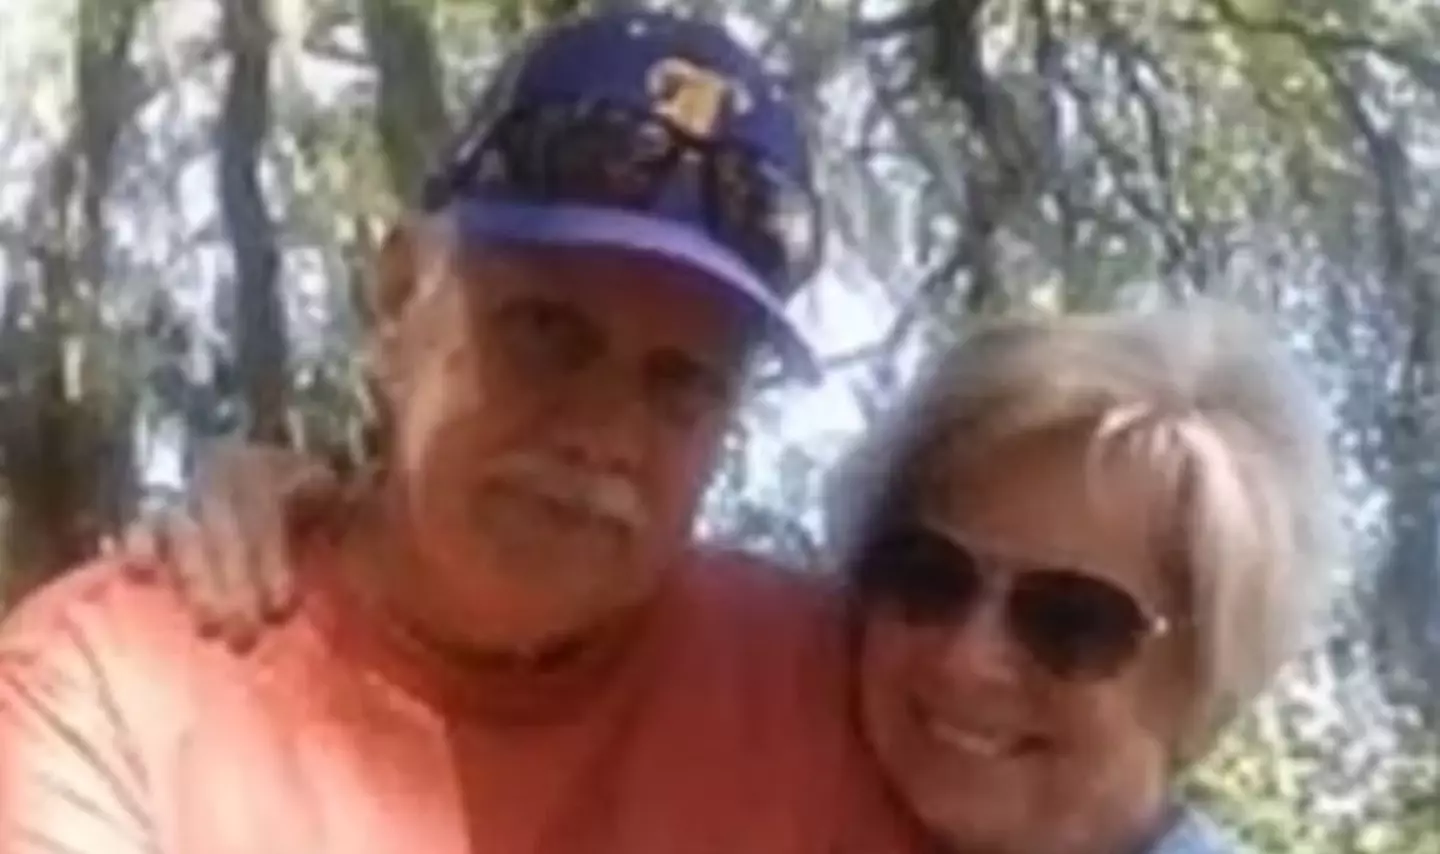 Barbara and Rick Smith had been married for 33 years. (WKYT)